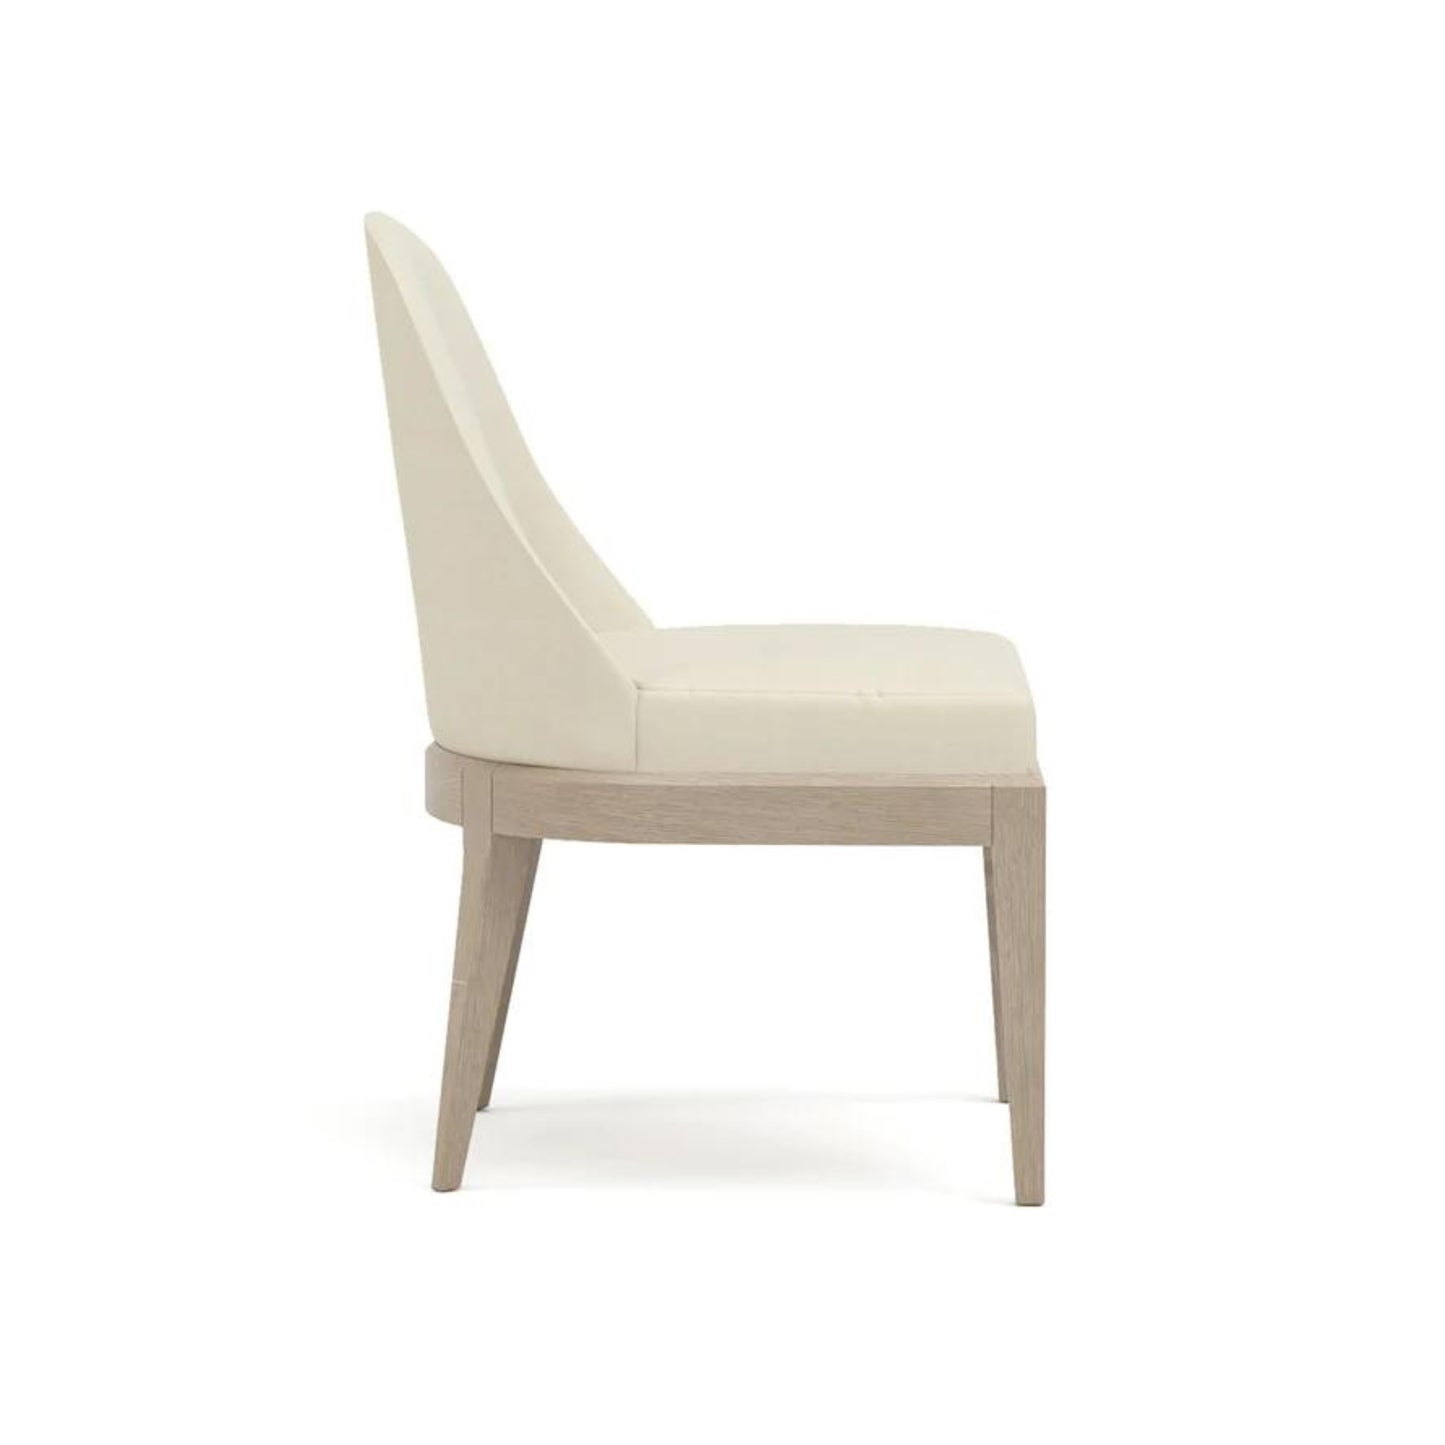 Maidstone Upholstered Side Chair